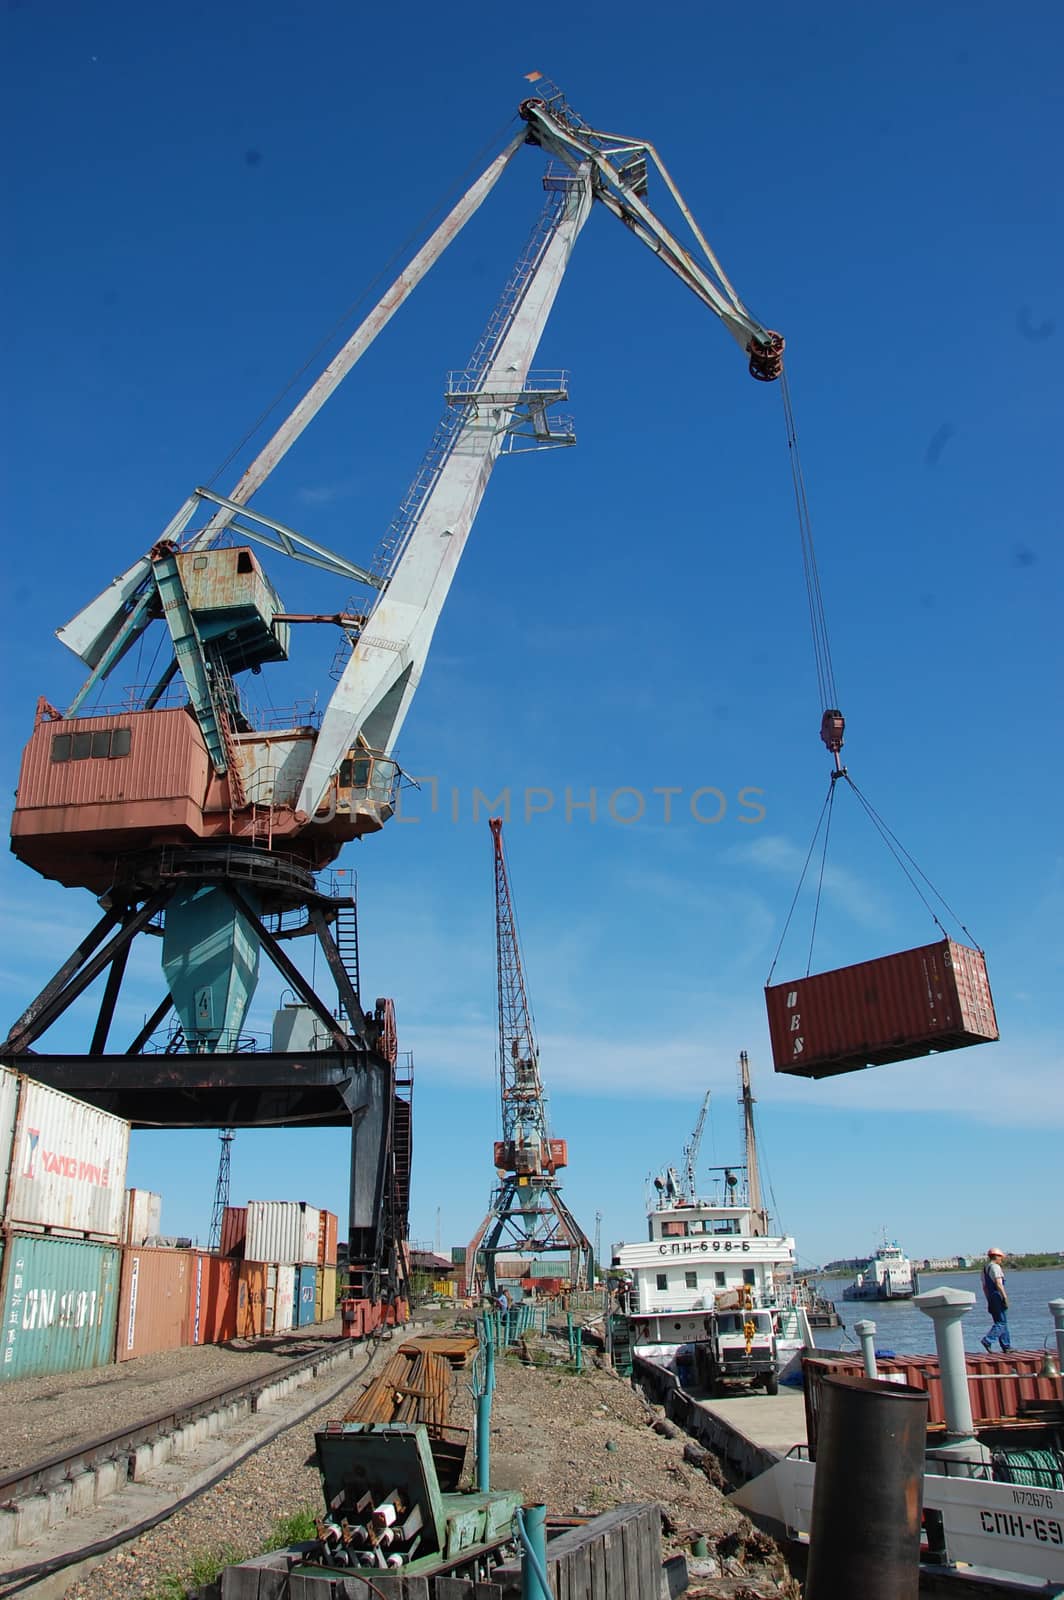 Dockside cargo crane with container at river port  by danemo